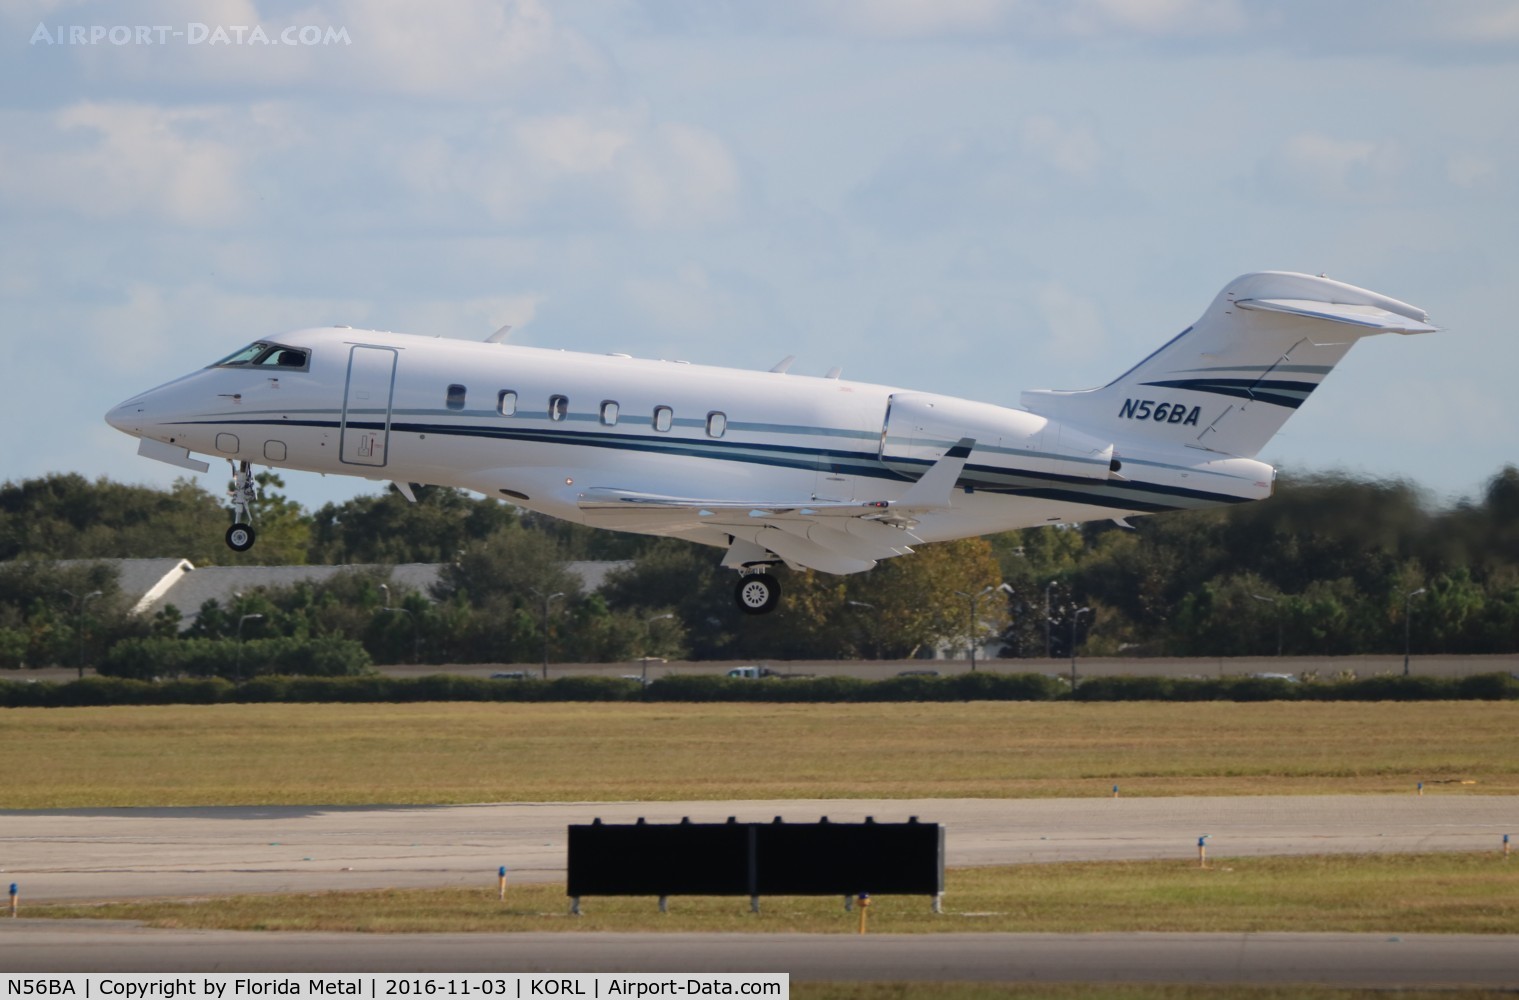 N56BA, 2008 Bombardier Challenger 300 (BD-100-1A10) C/N 20228, Challenger 300 zx